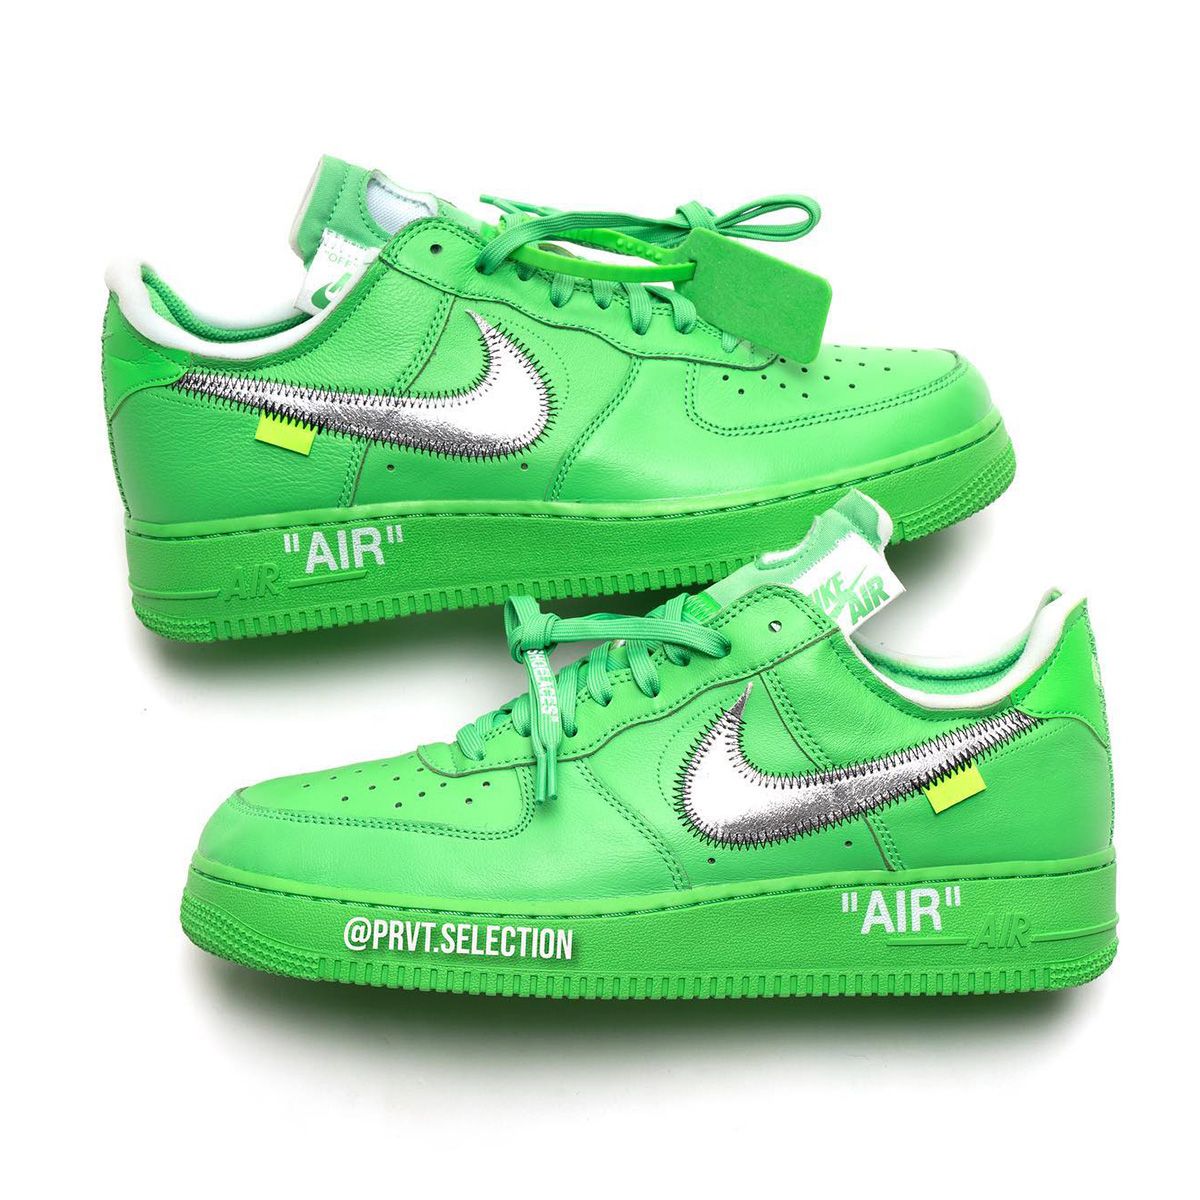 Where to Buy the OFF-WHITE x Nike Air Force 1 Low “Brooklyn ...